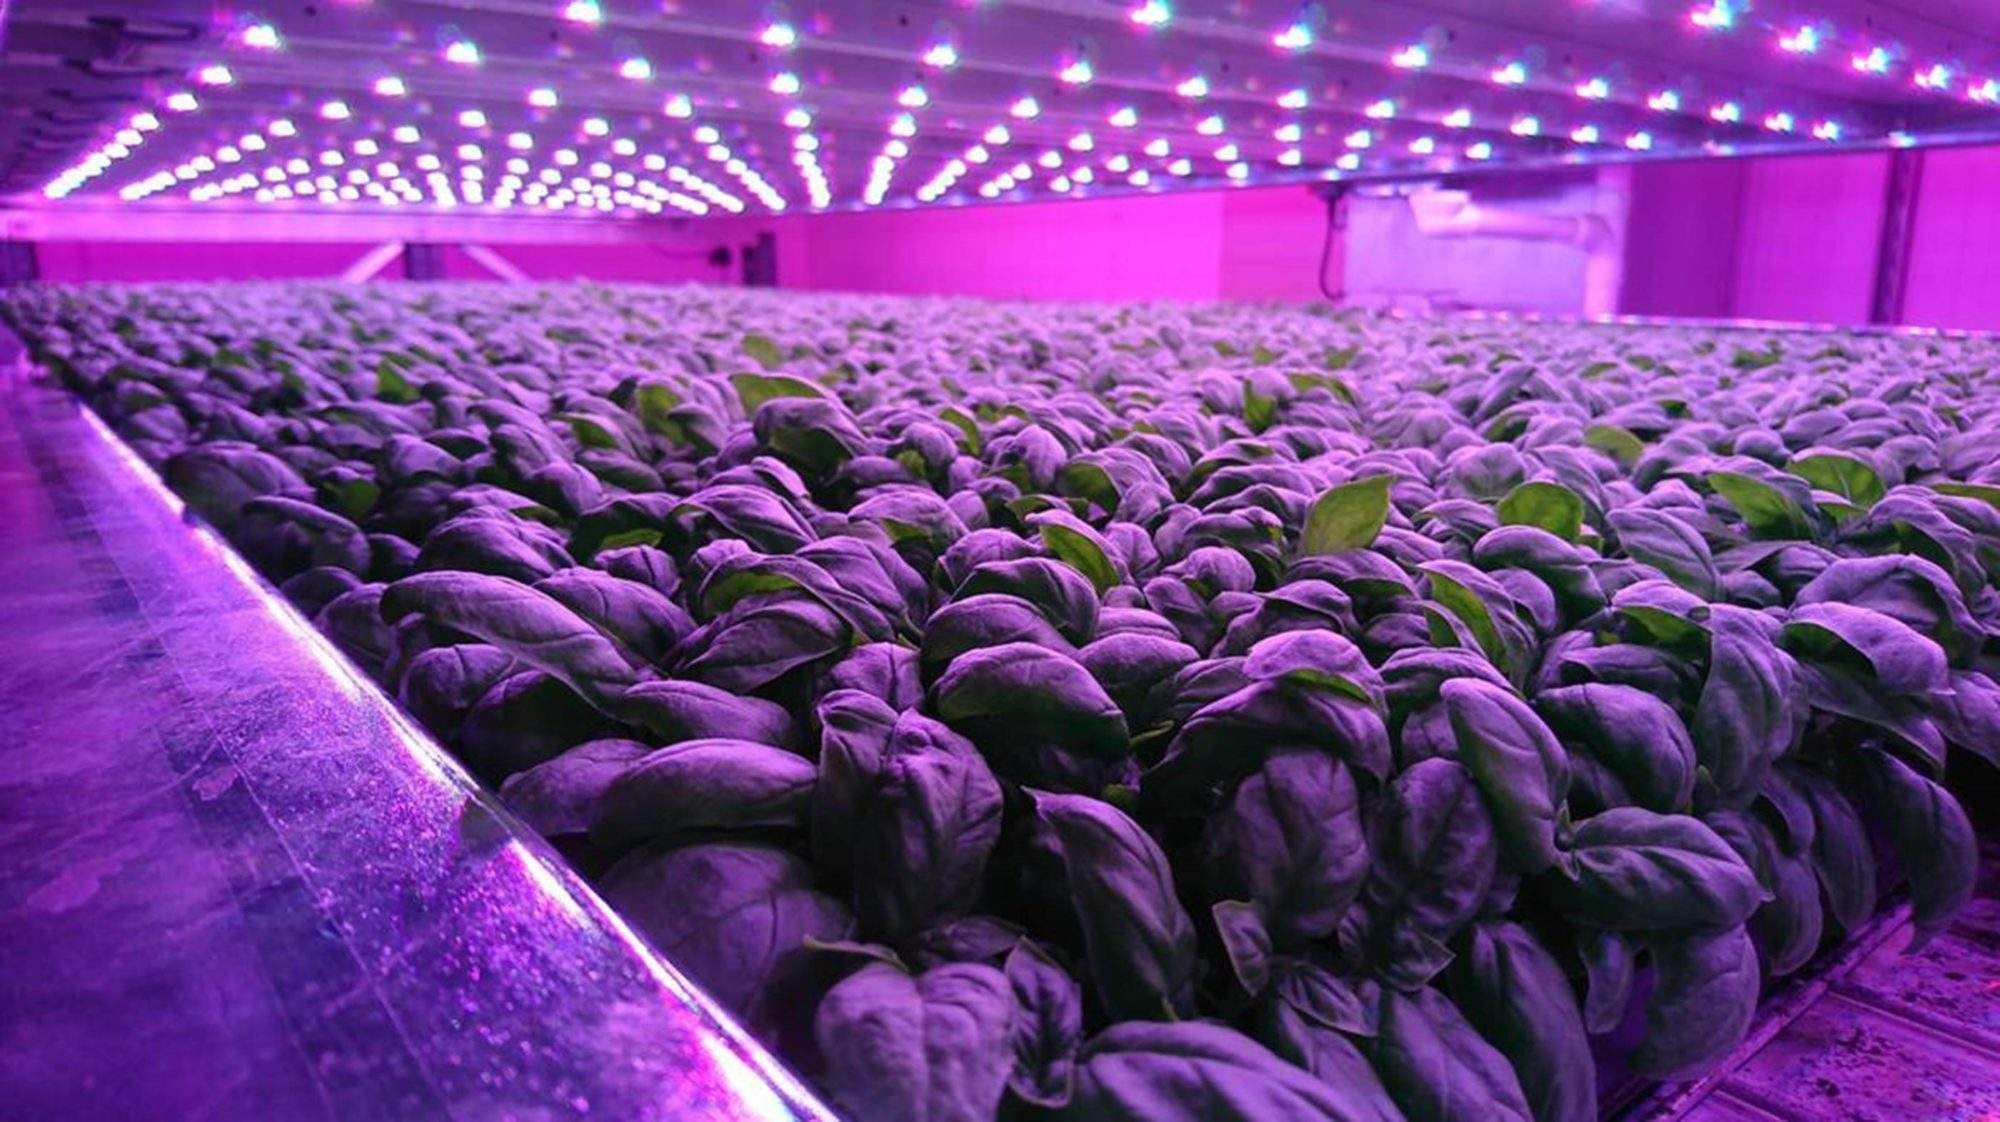 Brexit food security: An opportunity for vertical farming?